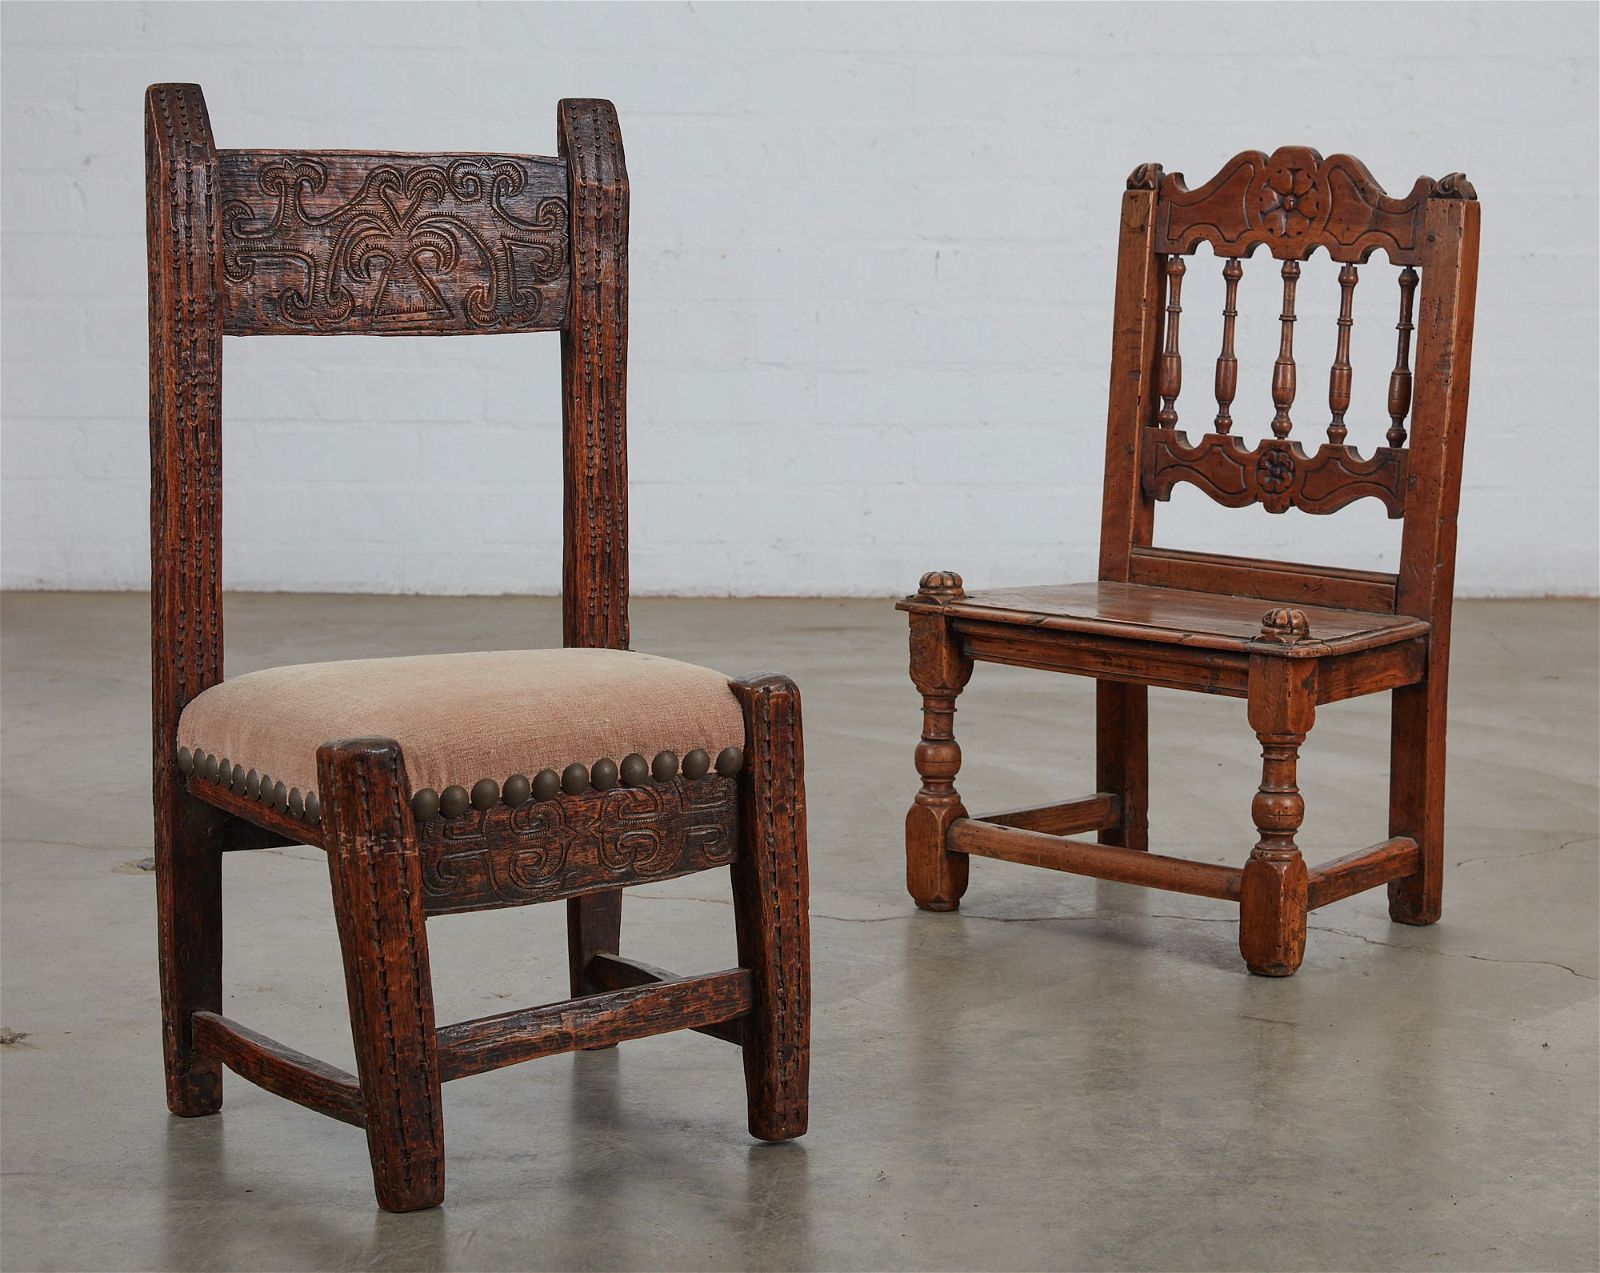 TWO CONTINENTAL BAROQUE LOW CHAIRSTwo